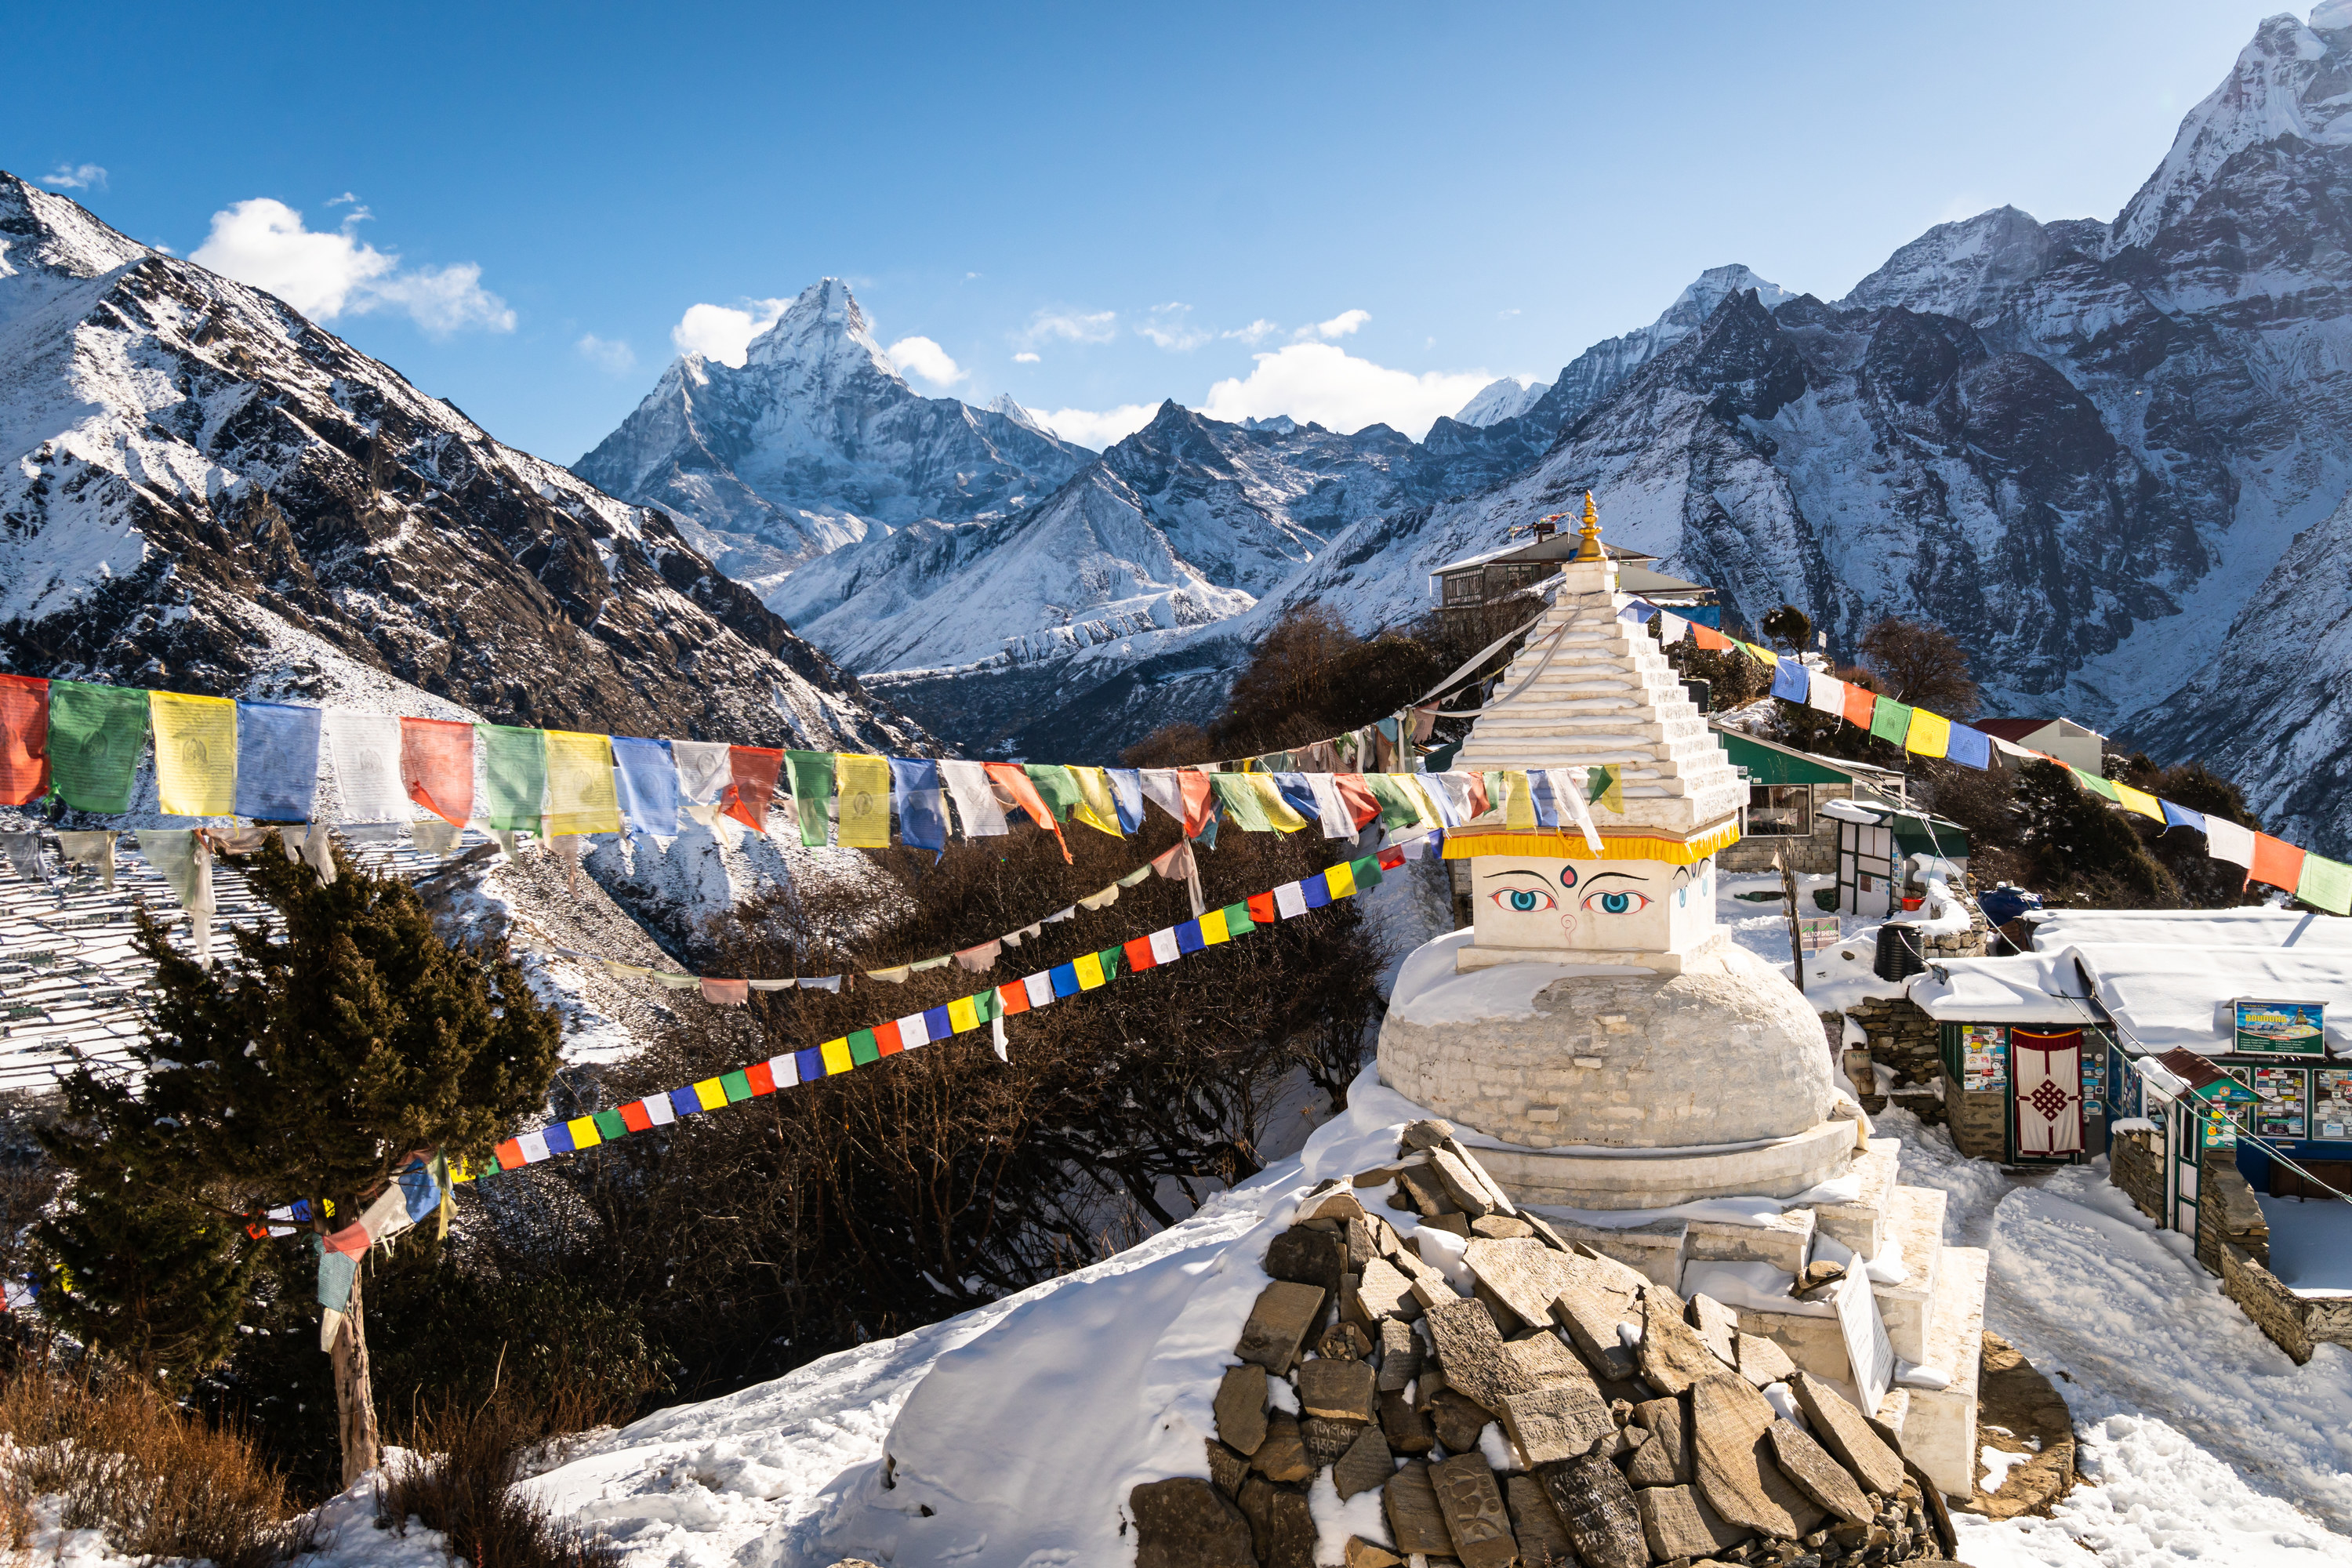 Religious monument surrounded by snow-covered peaks